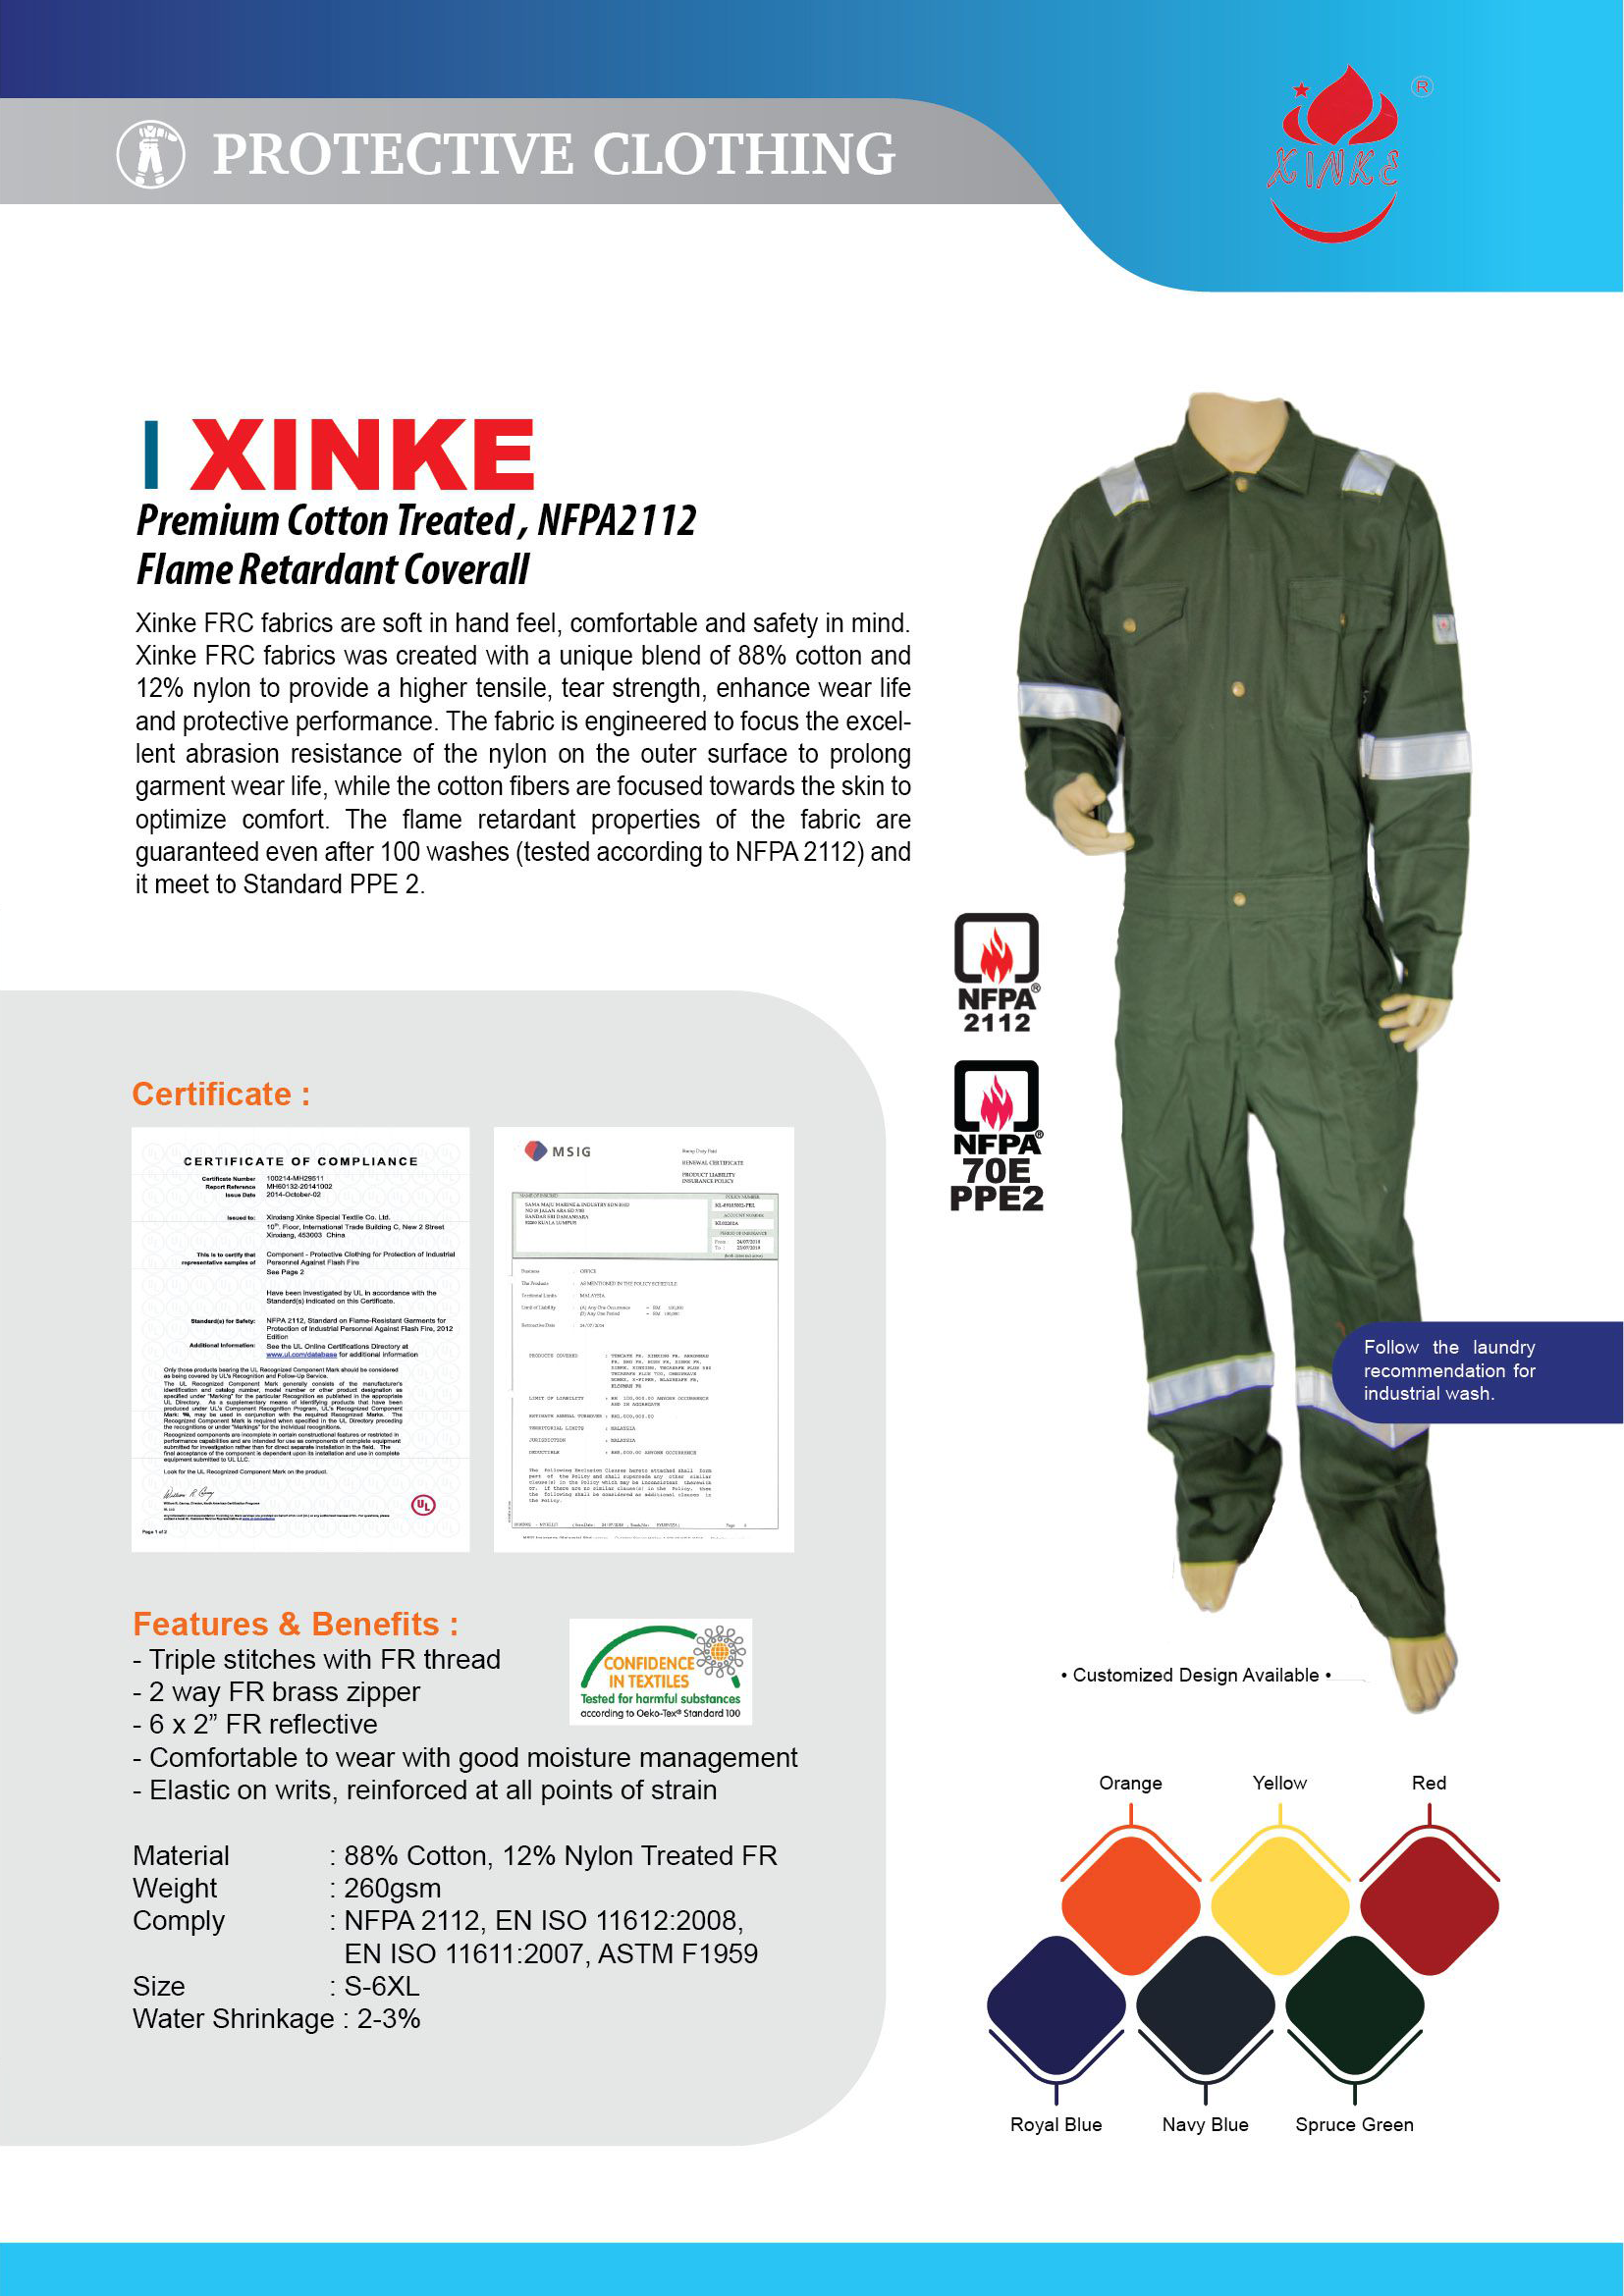 xinke-fr-cotton-treated-260gsm-coverall-hb-safety-equipment